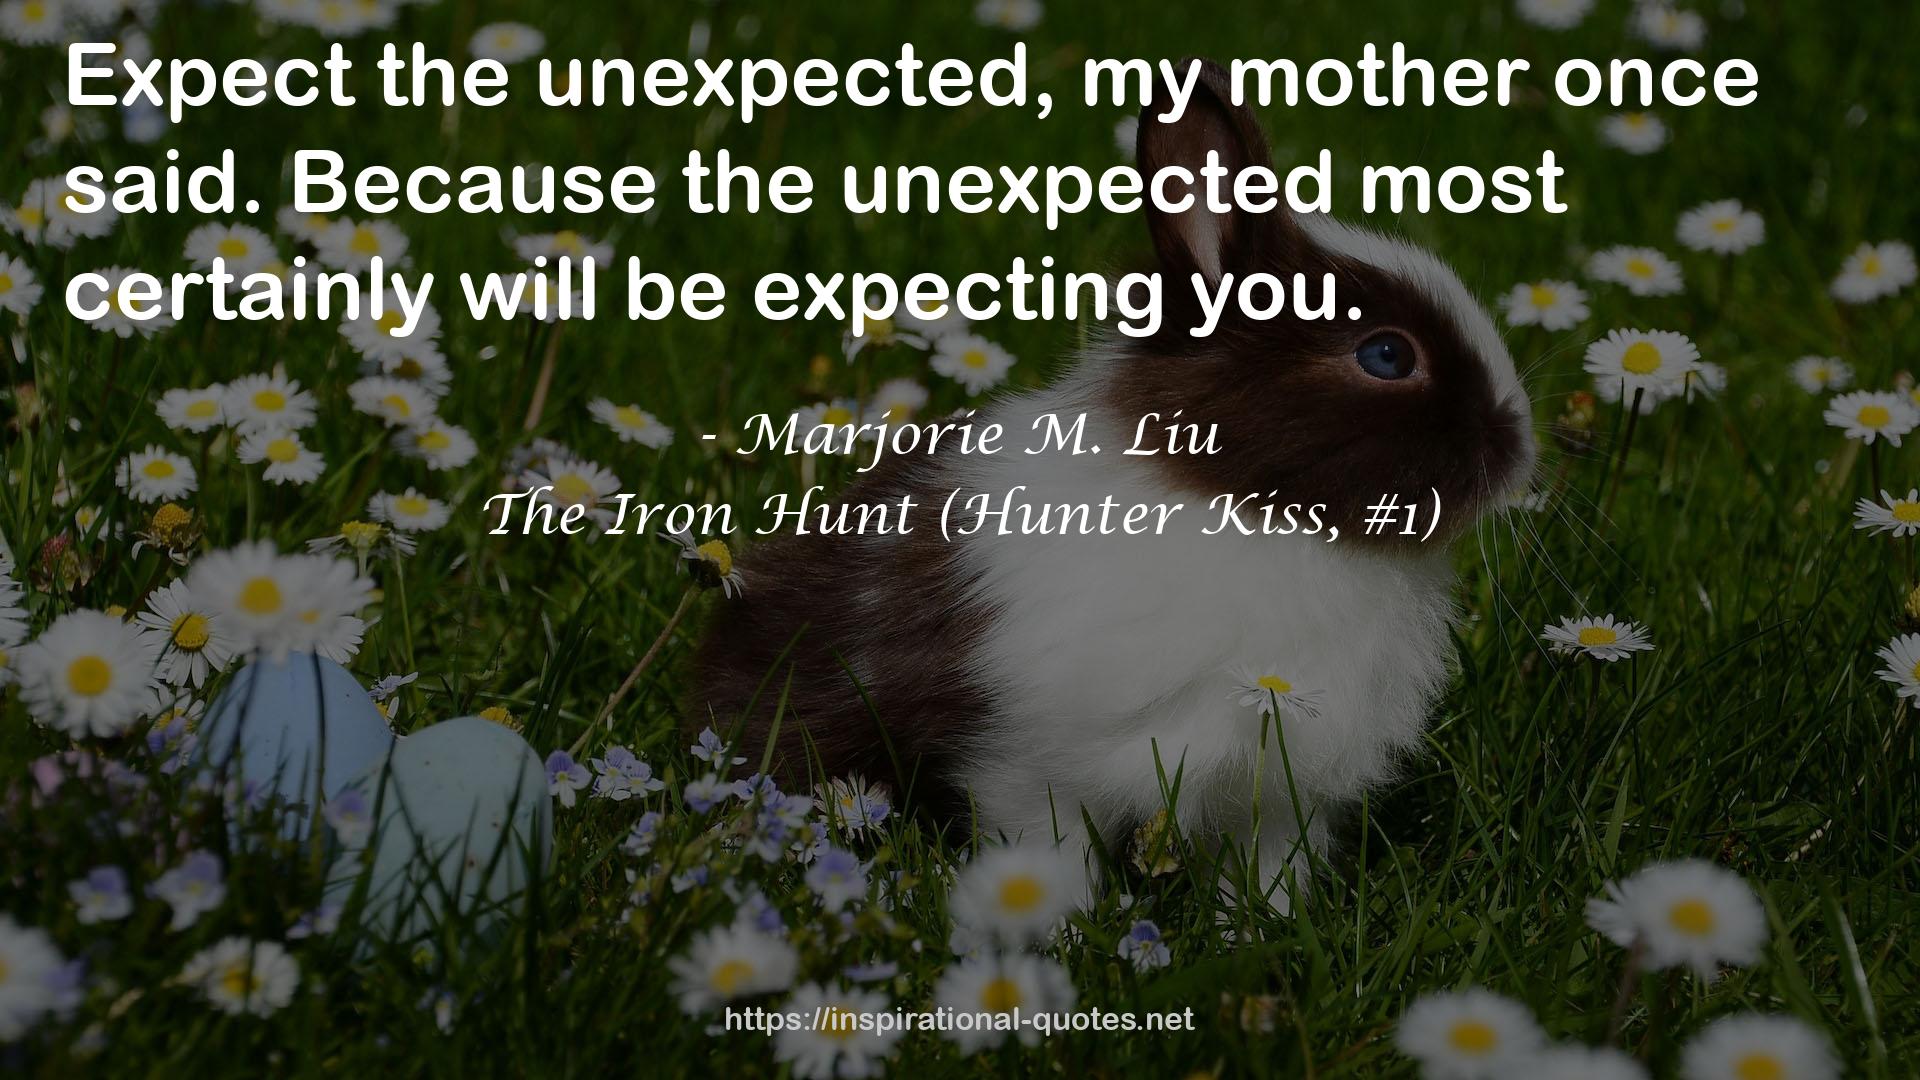 The Iron Hunt (Hunter Kiss, #1) QUOTES